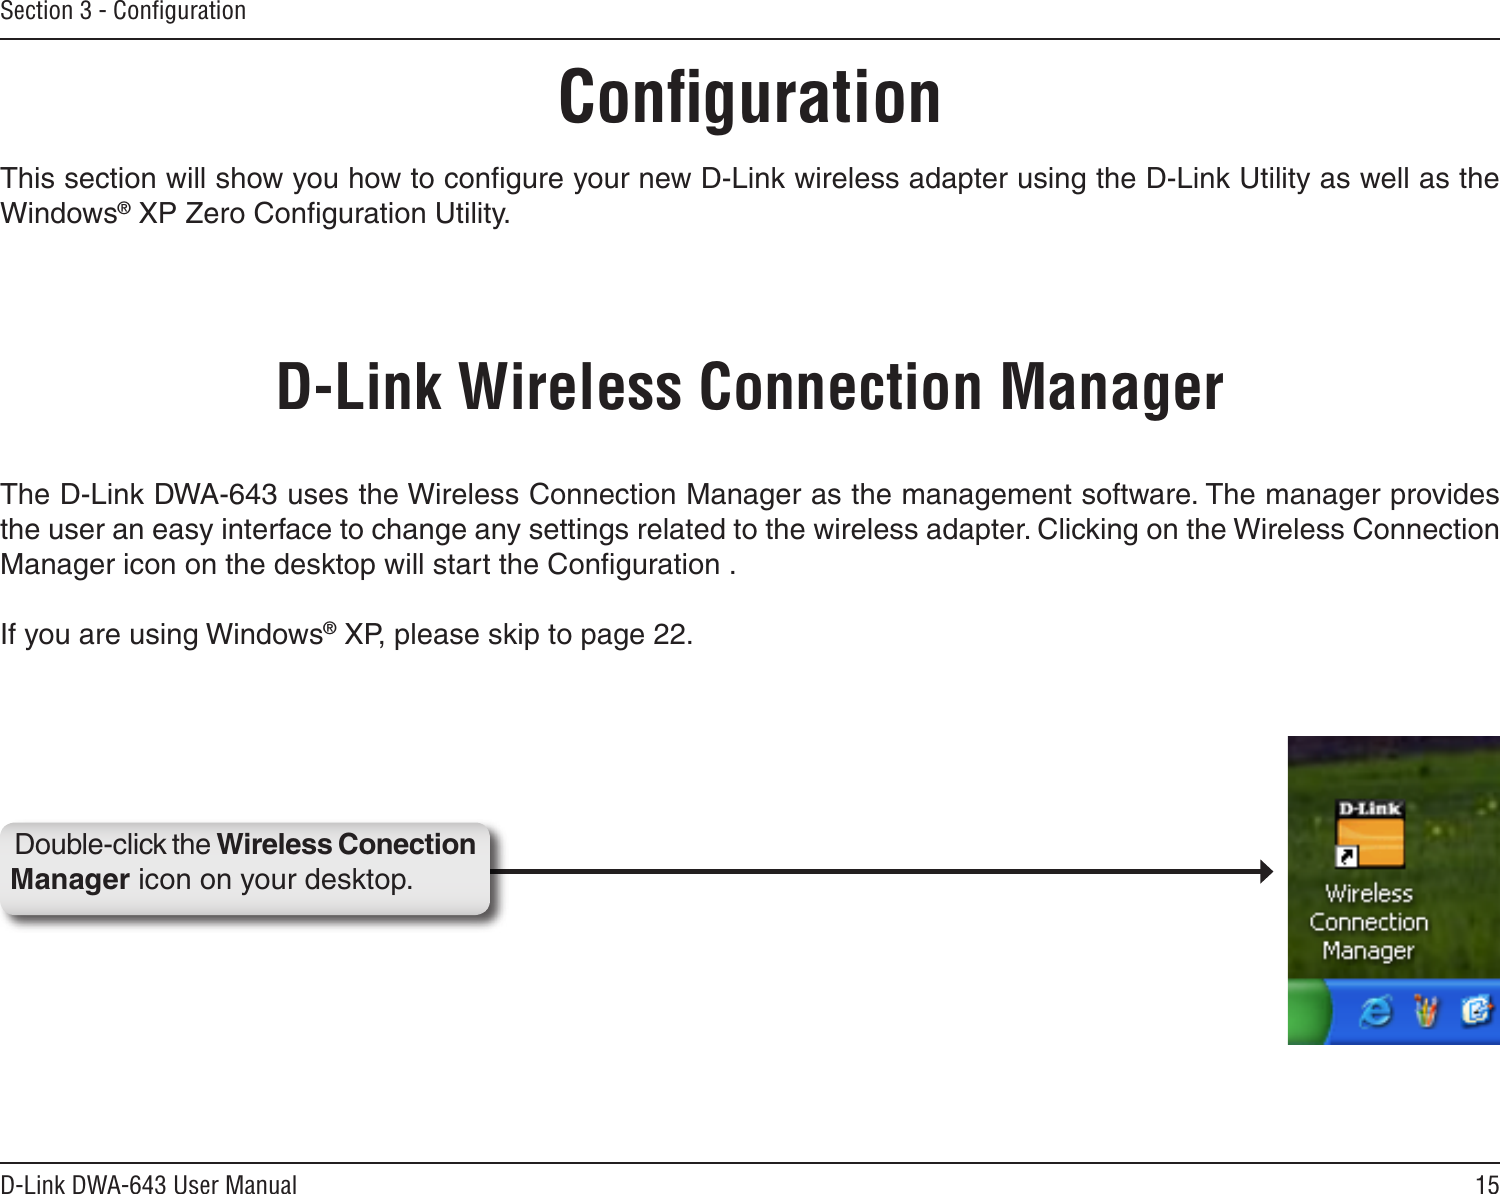 15D-Link DWA-643 User ManualSection 3 - ConﬁgurationConﬁgurationThis section will show you how to conﬁgure your new D-Link wireless adapter using the D-Link Utility as well as the Windows® XP Zero Conﬁguration Utility.D-Link Wireless Connection ManagerThe D-Link DWA-643 uses the Wireless Connection Manager as the management software. The manager provides the user an easy interface to change any settings related to the wireless adapter. Clicking on the Wireless Connection Manager icon on the desktop will start the Conﬁguration .If you are using Windows® XP, please skip to page 22.Double-click the Wireless Conection Manager icon on your desktop.